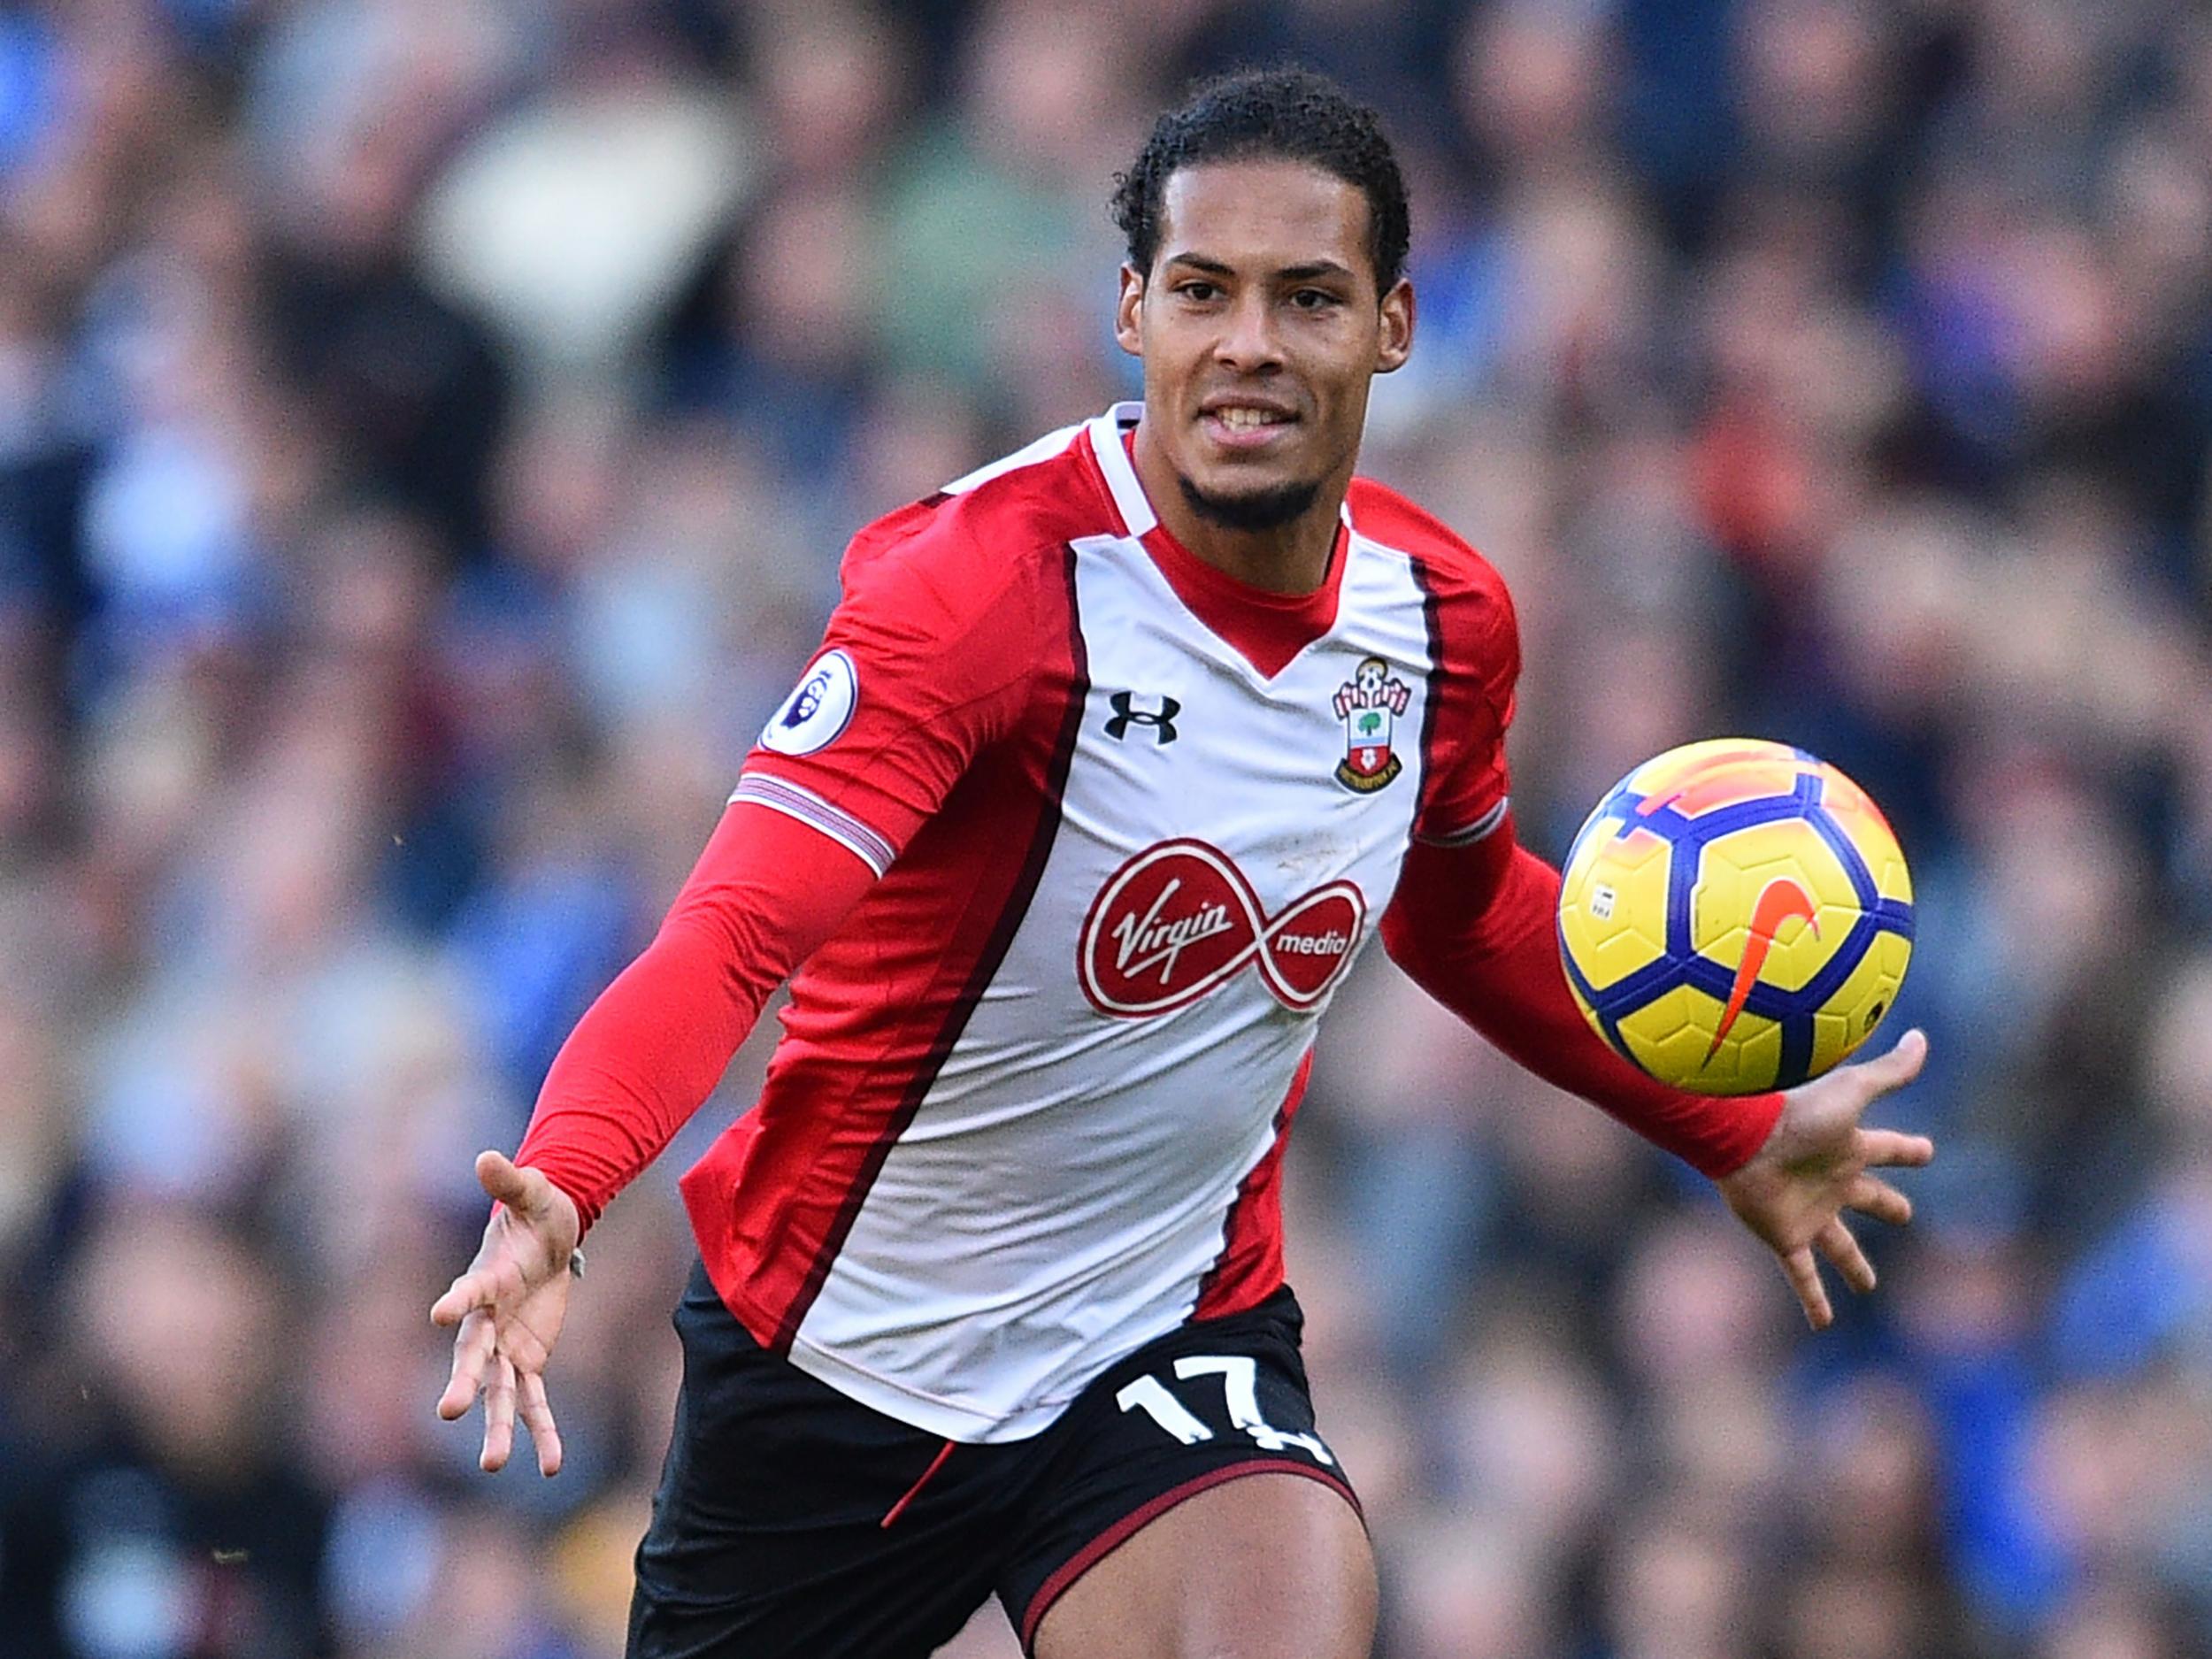 Virgil van Dijk&apos;s latest comments should remind Liverpool to look for alternatives